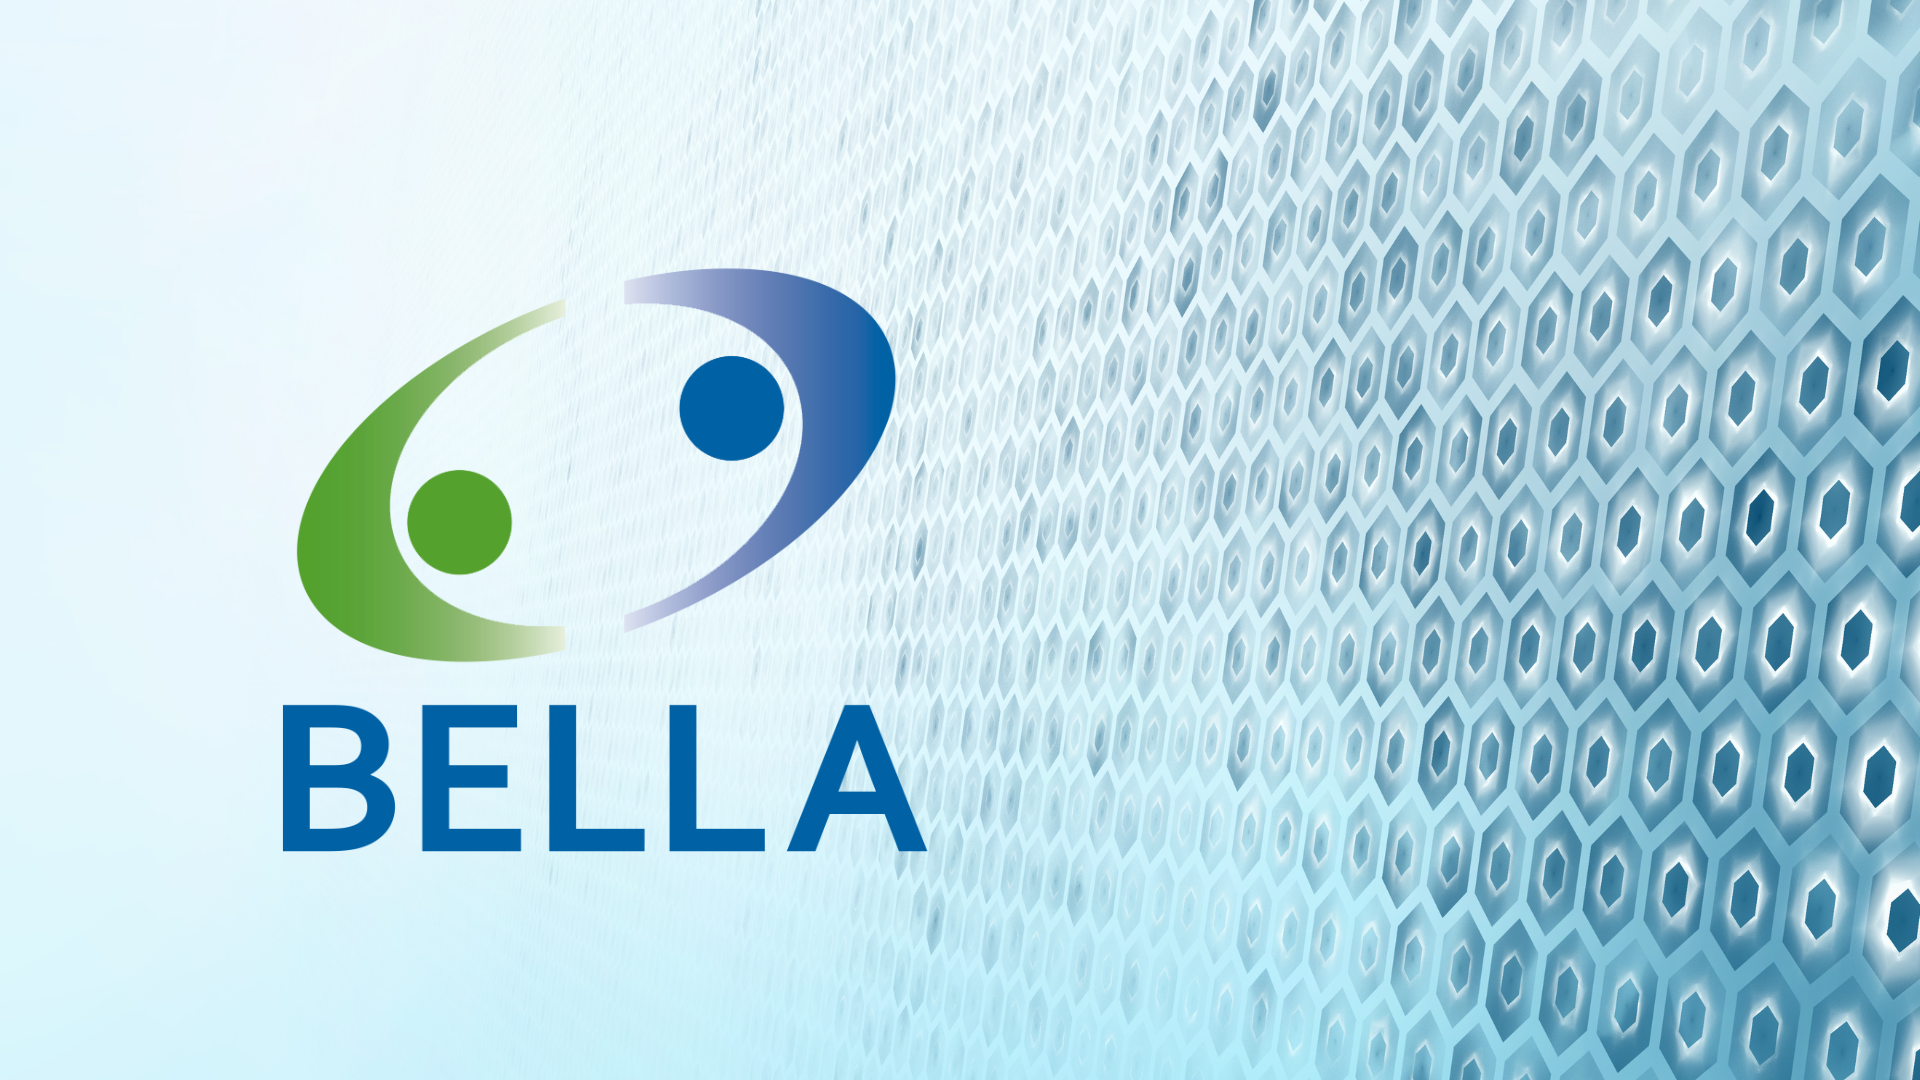 BELLA Programme successfully closes its first phase overcoming terrestrial and submarine challenges